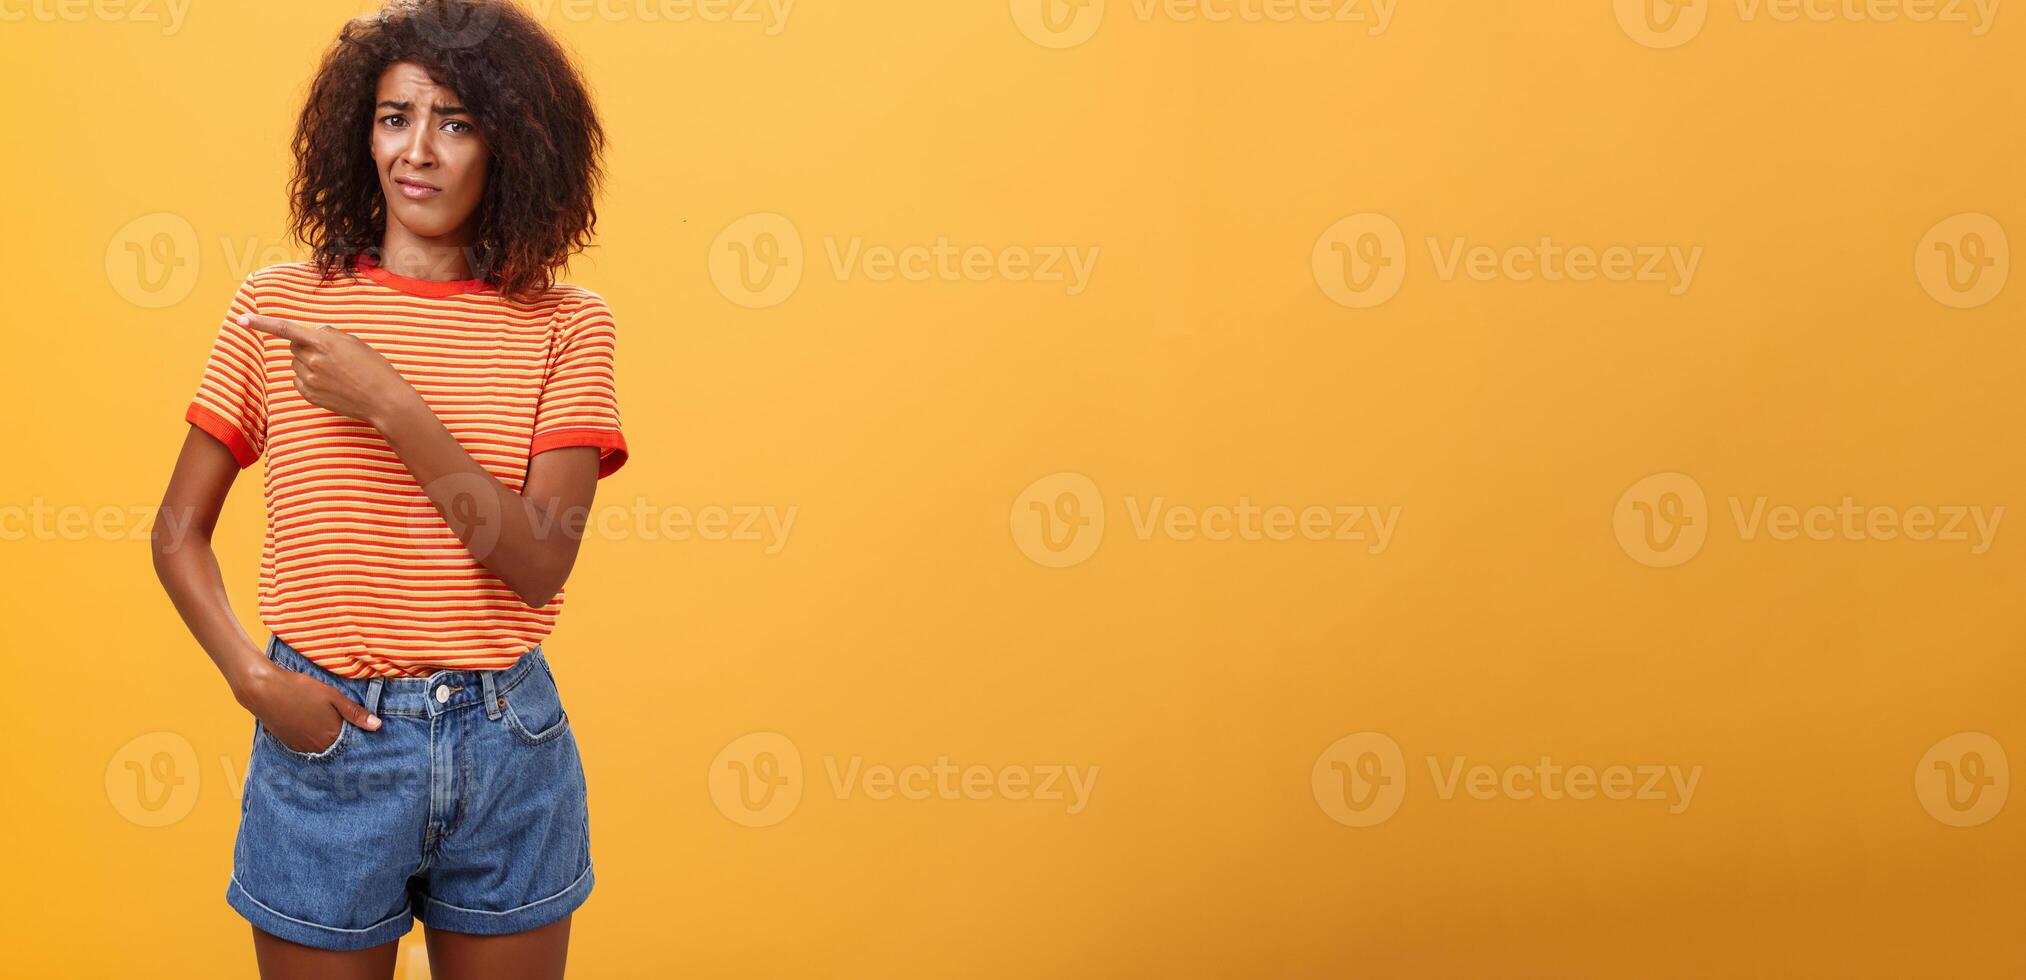 Not worth my time. Displeased unimpressed stylish attractive dark-skinned female model in striped t-shirt and denim shorts frowning with picky expression pointing left doubtful and dissatisfied photo